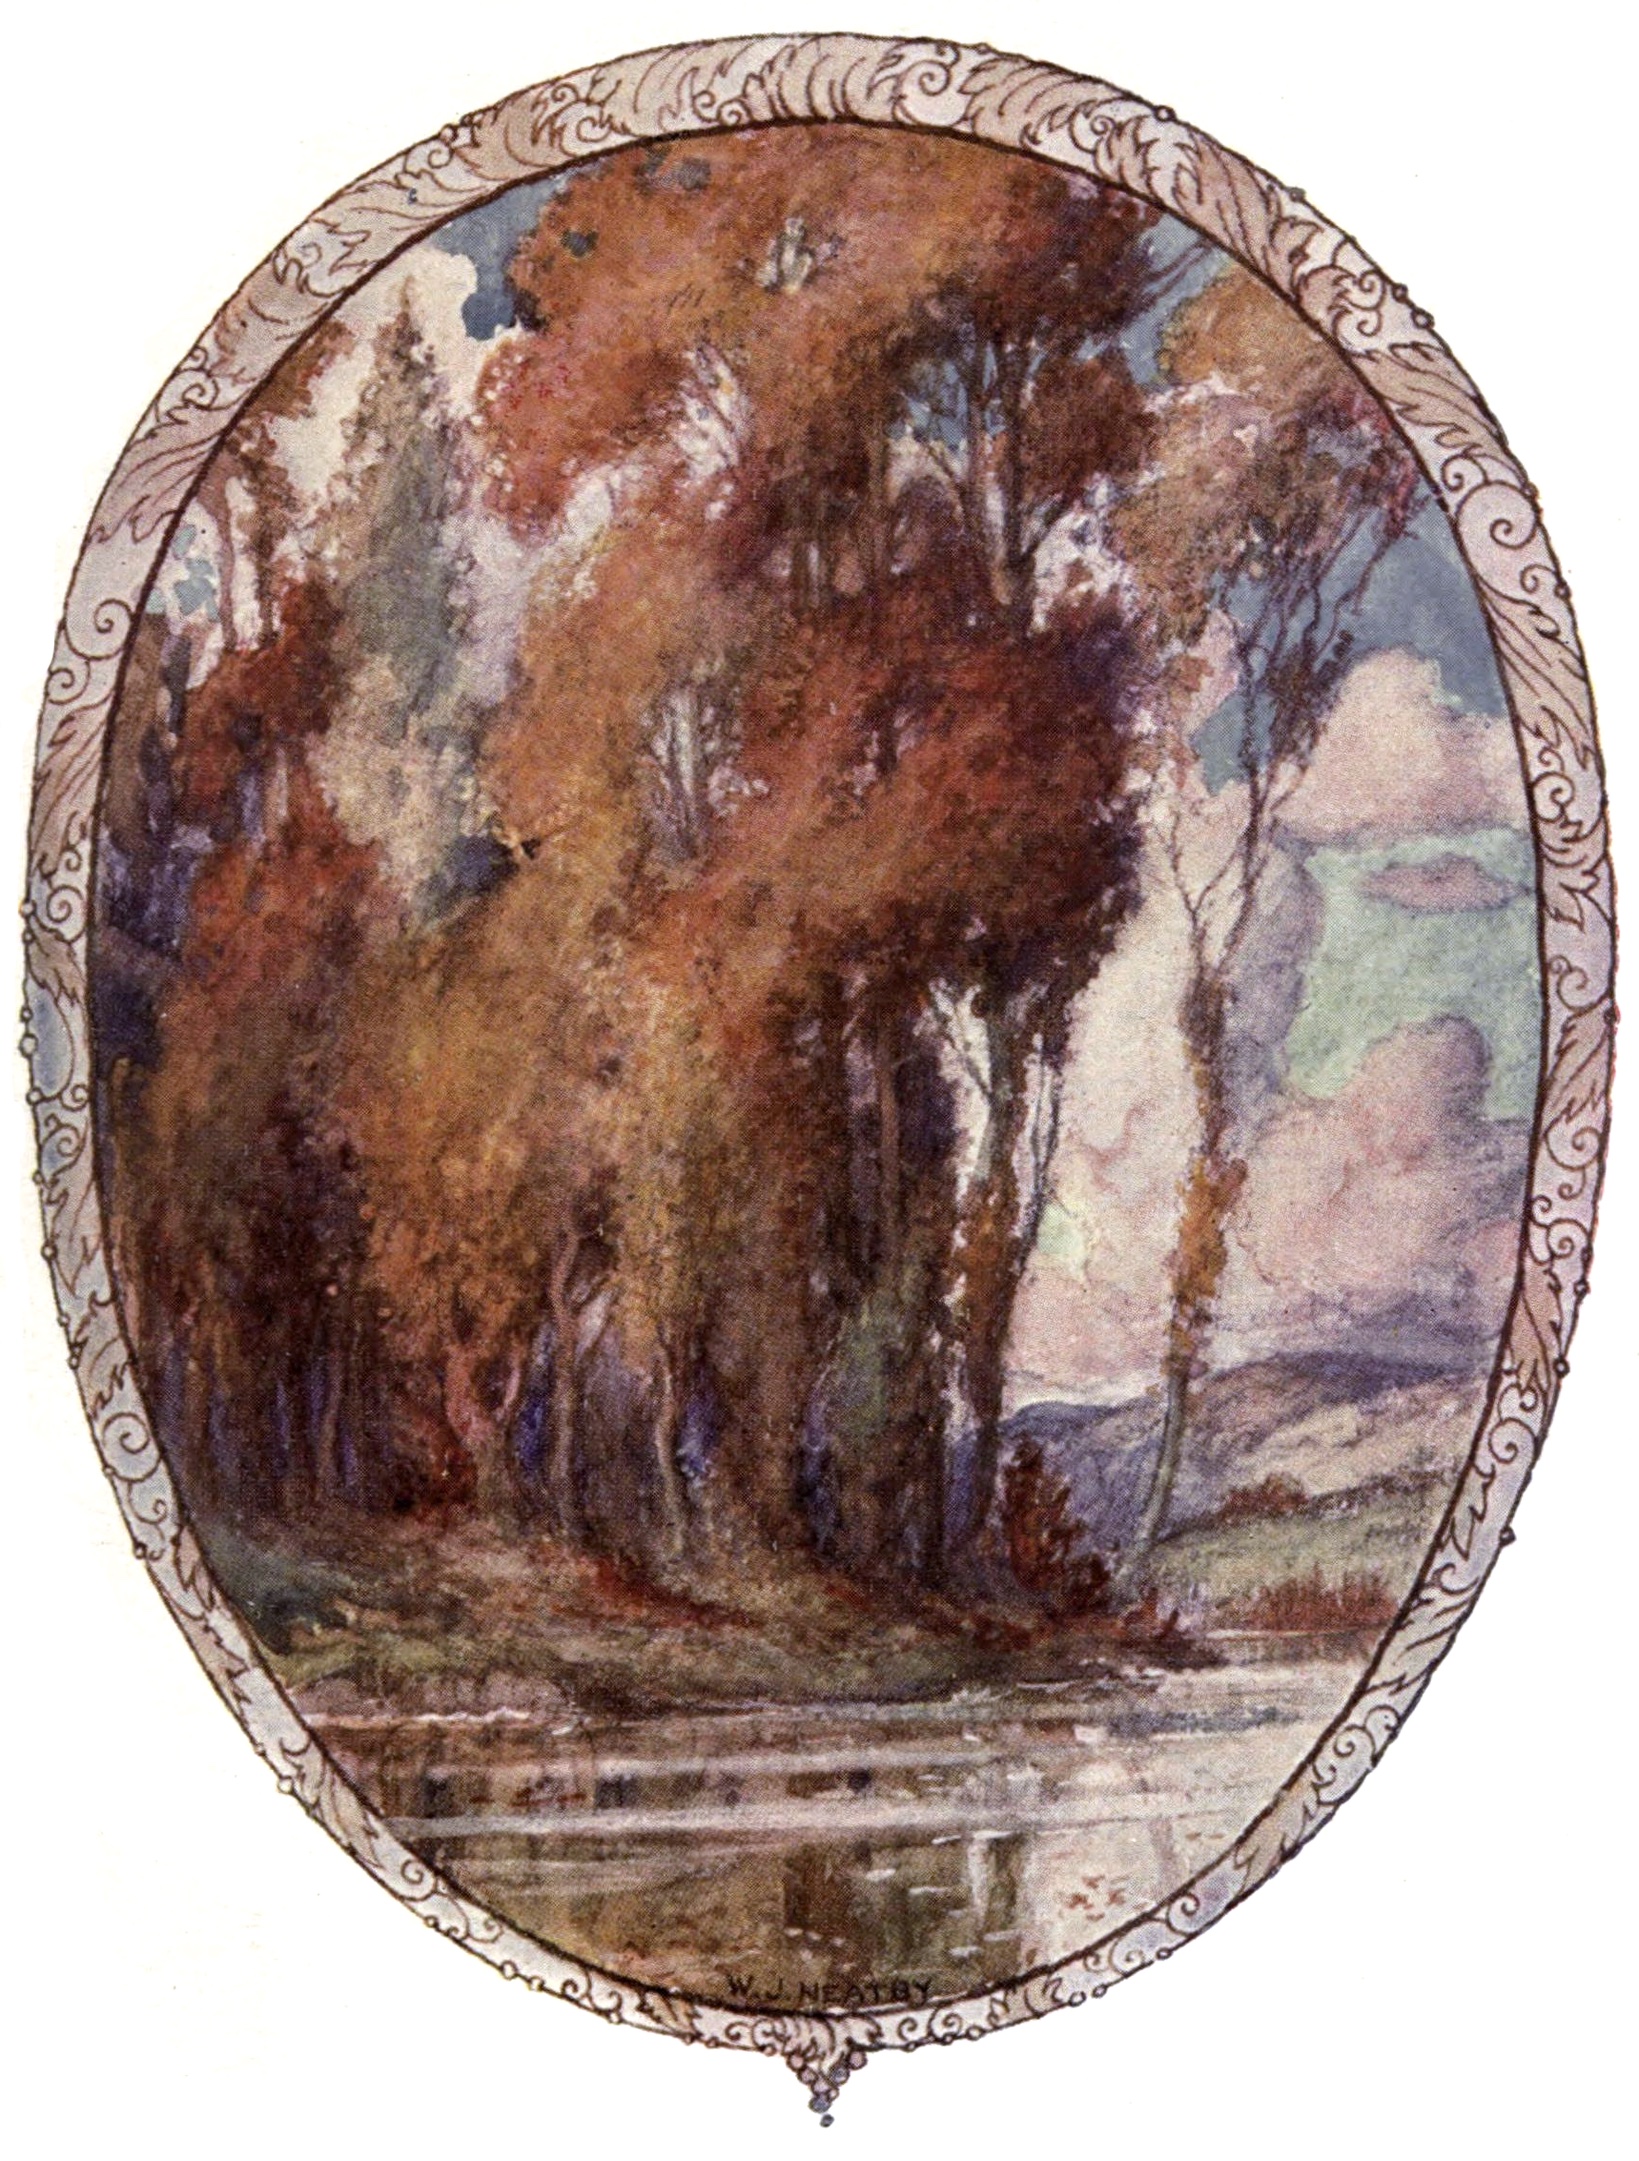 An oval shape details the image of a calm river against the backdrop of autumnal trees.